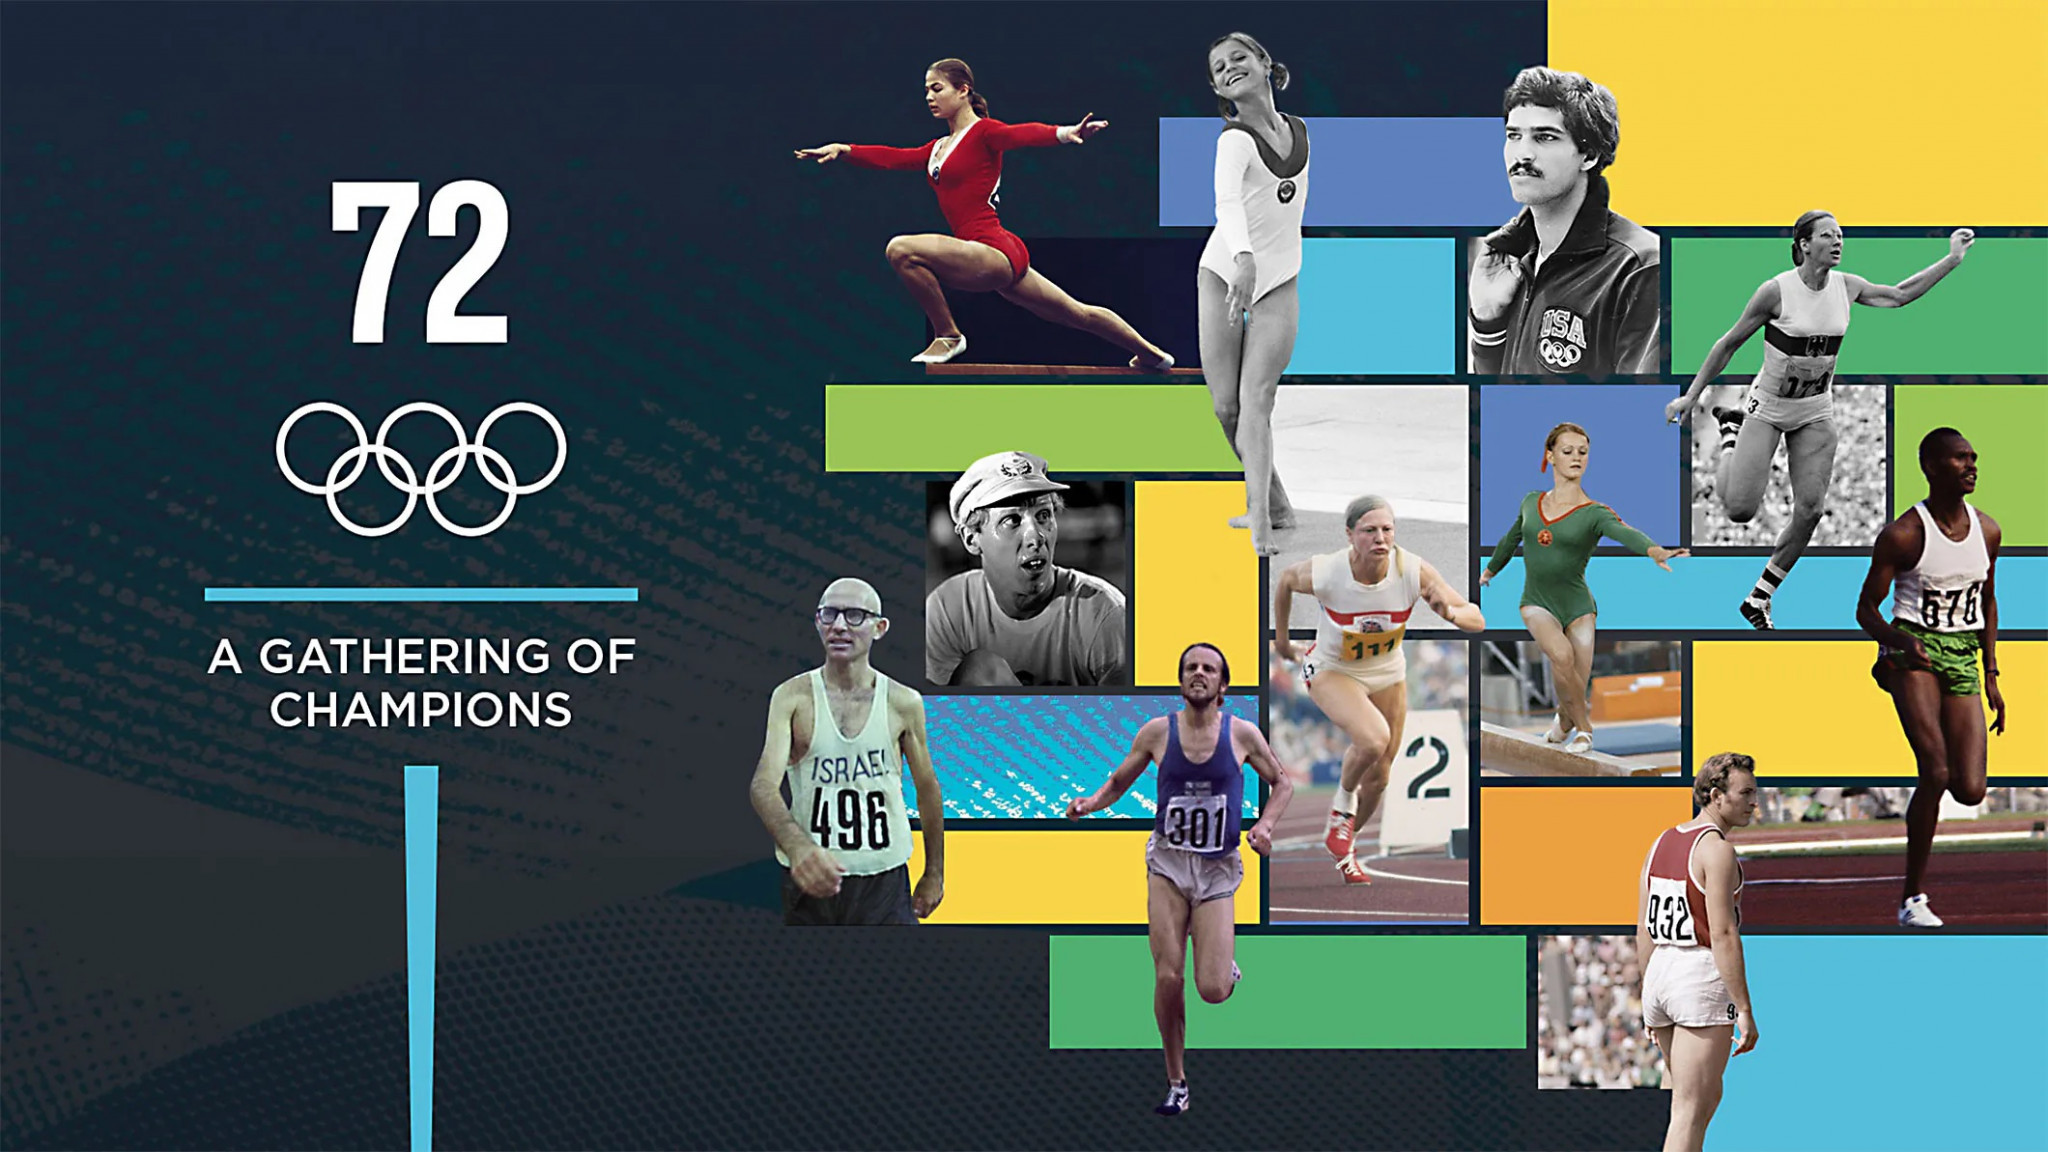 Documentary series released to mark 50th anniversary of Munich 1972 Olympics